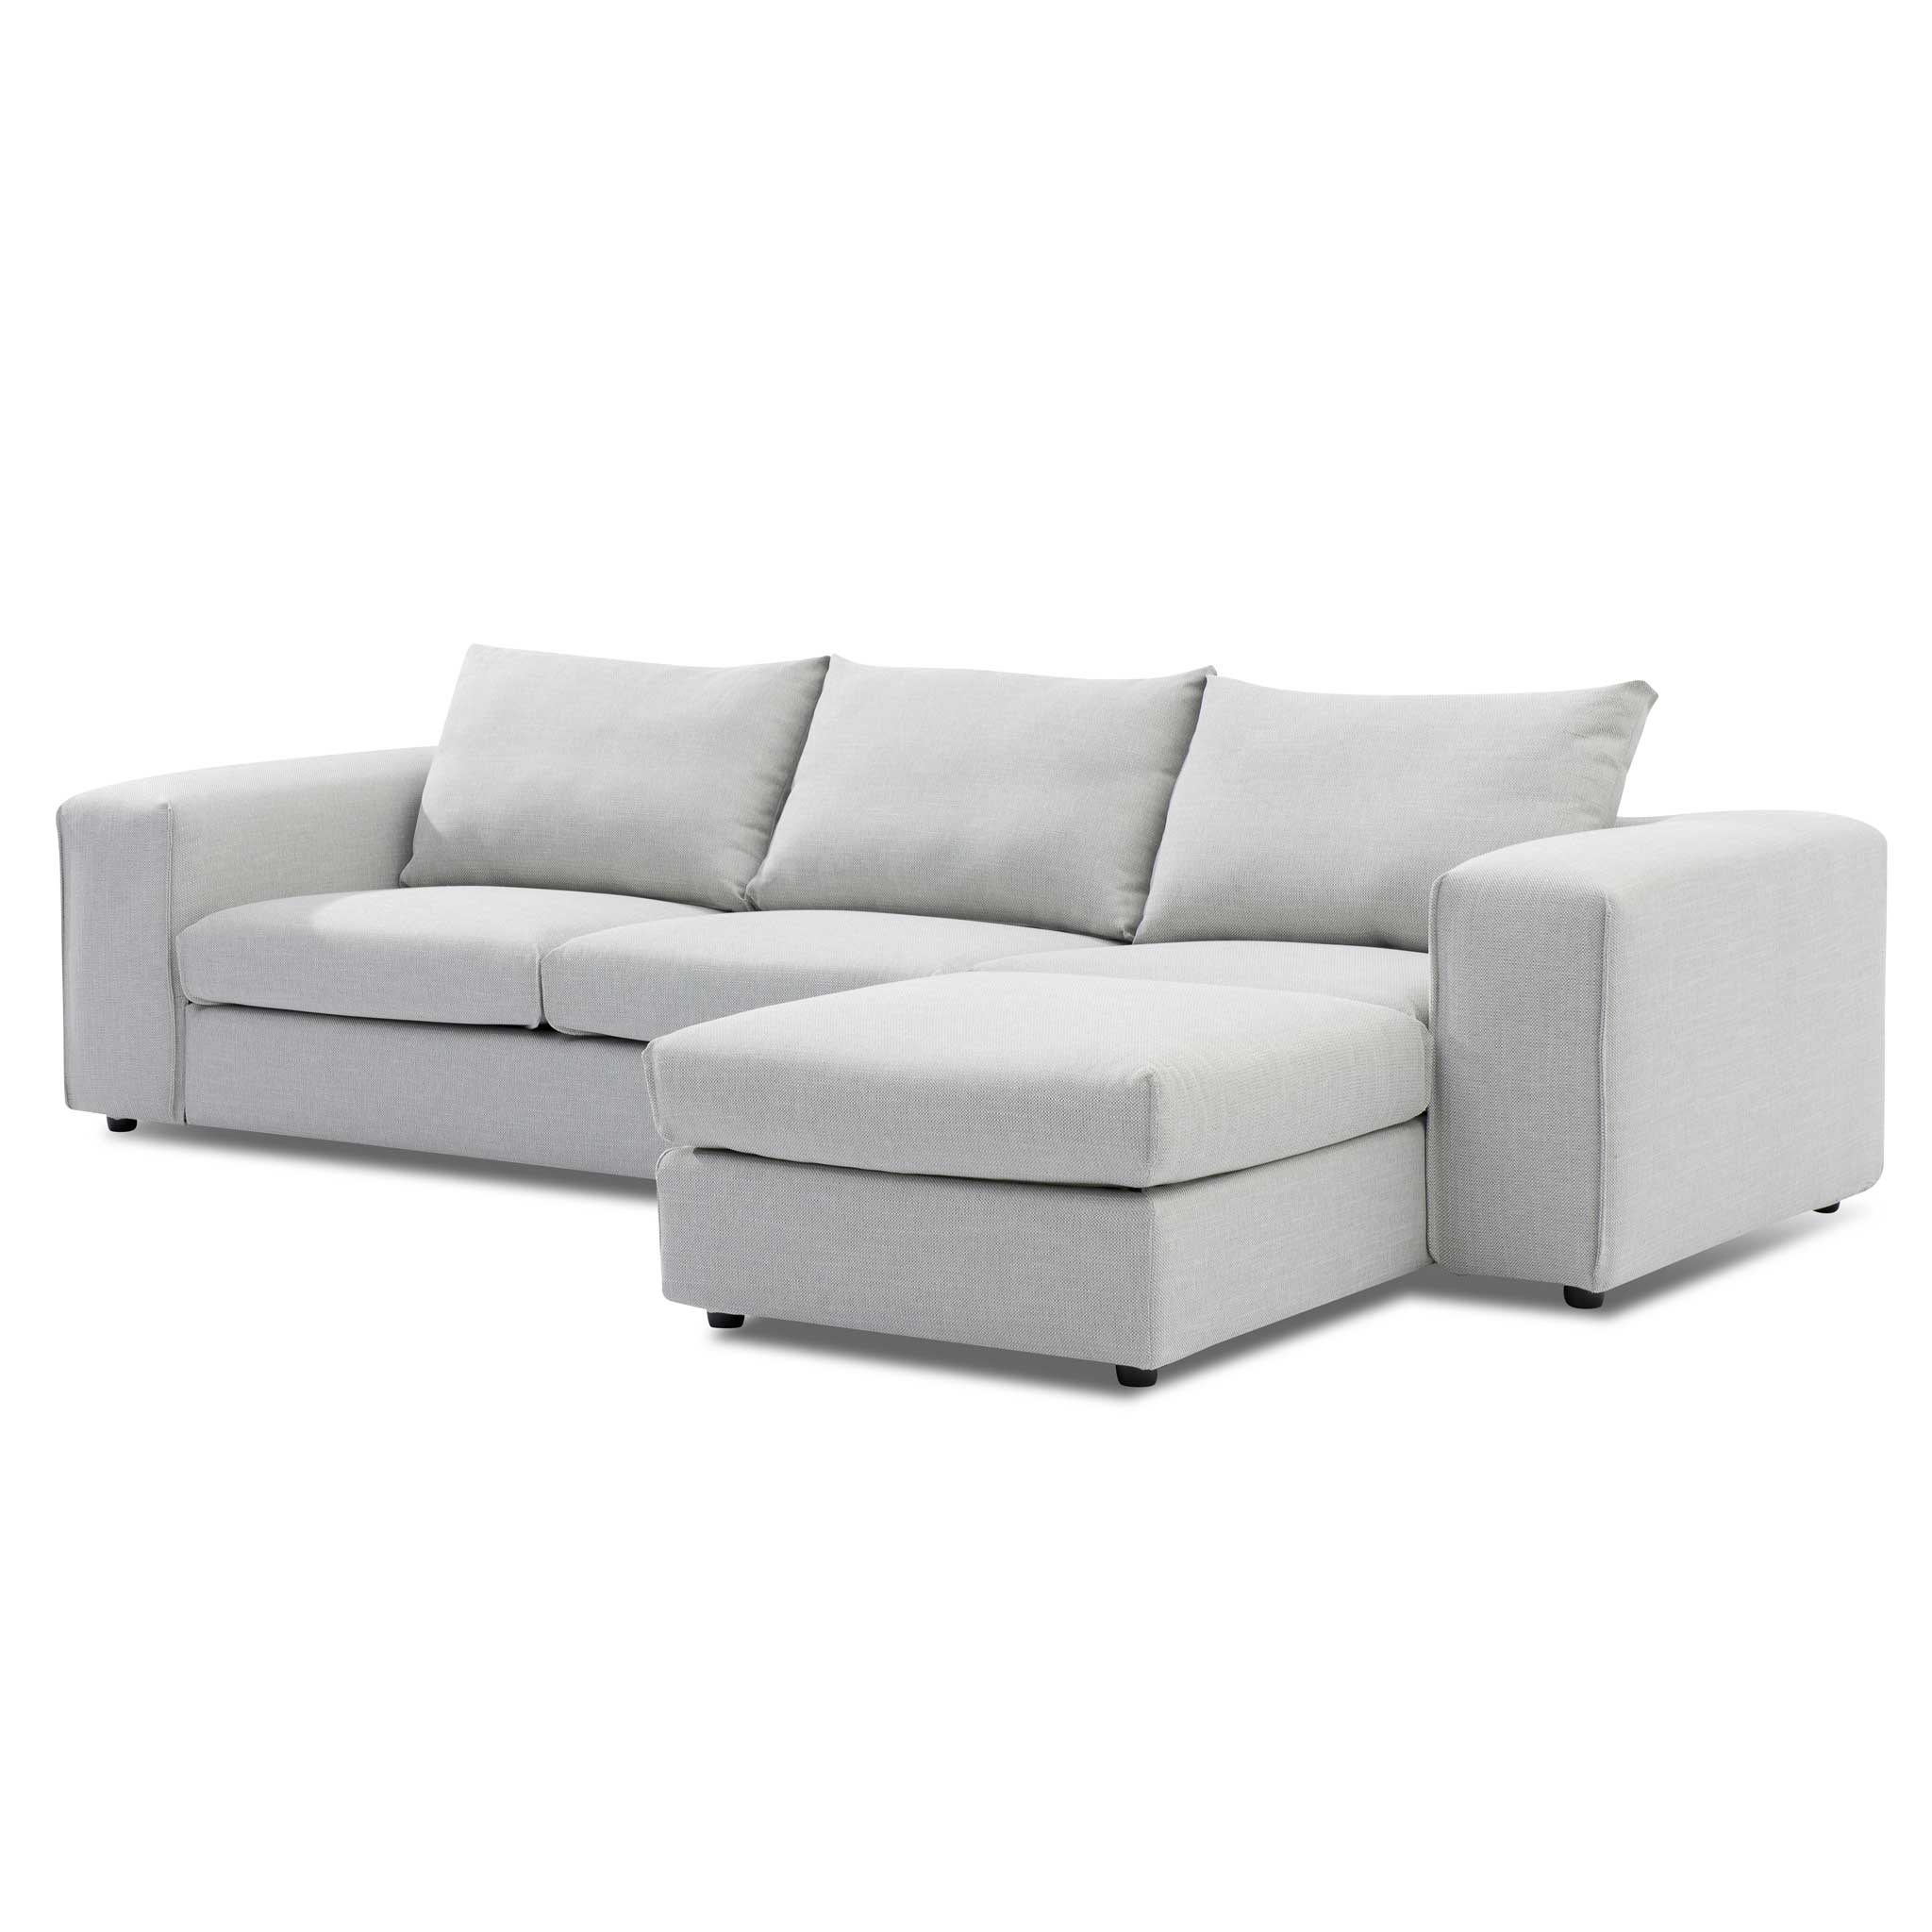 Brooklyn 4 Seater Right Chaise Sofa with Ottoman - Light TextureGrey